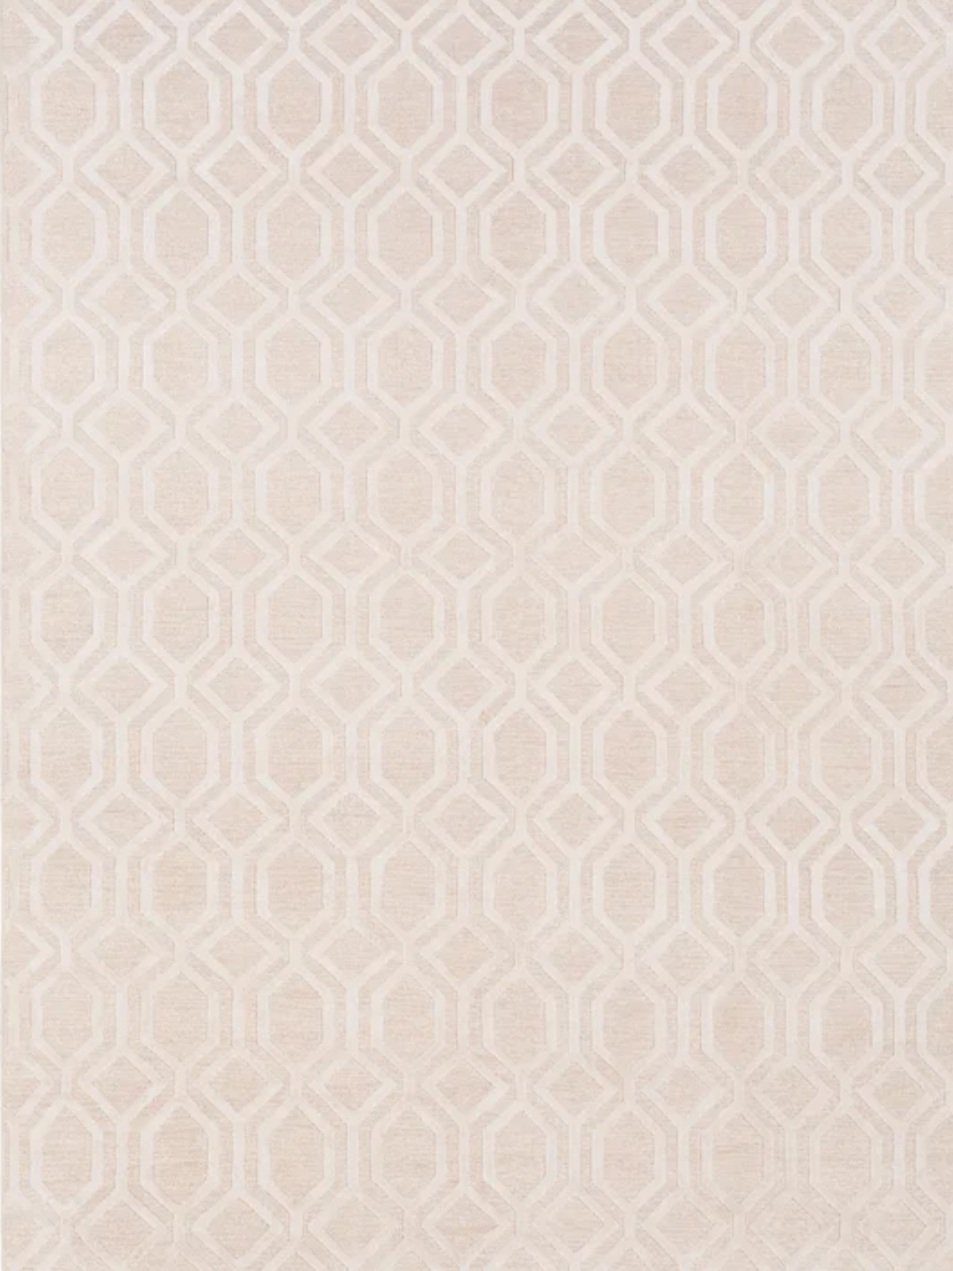 Hand-Knotted Linen Geometric Area Rug in Blush